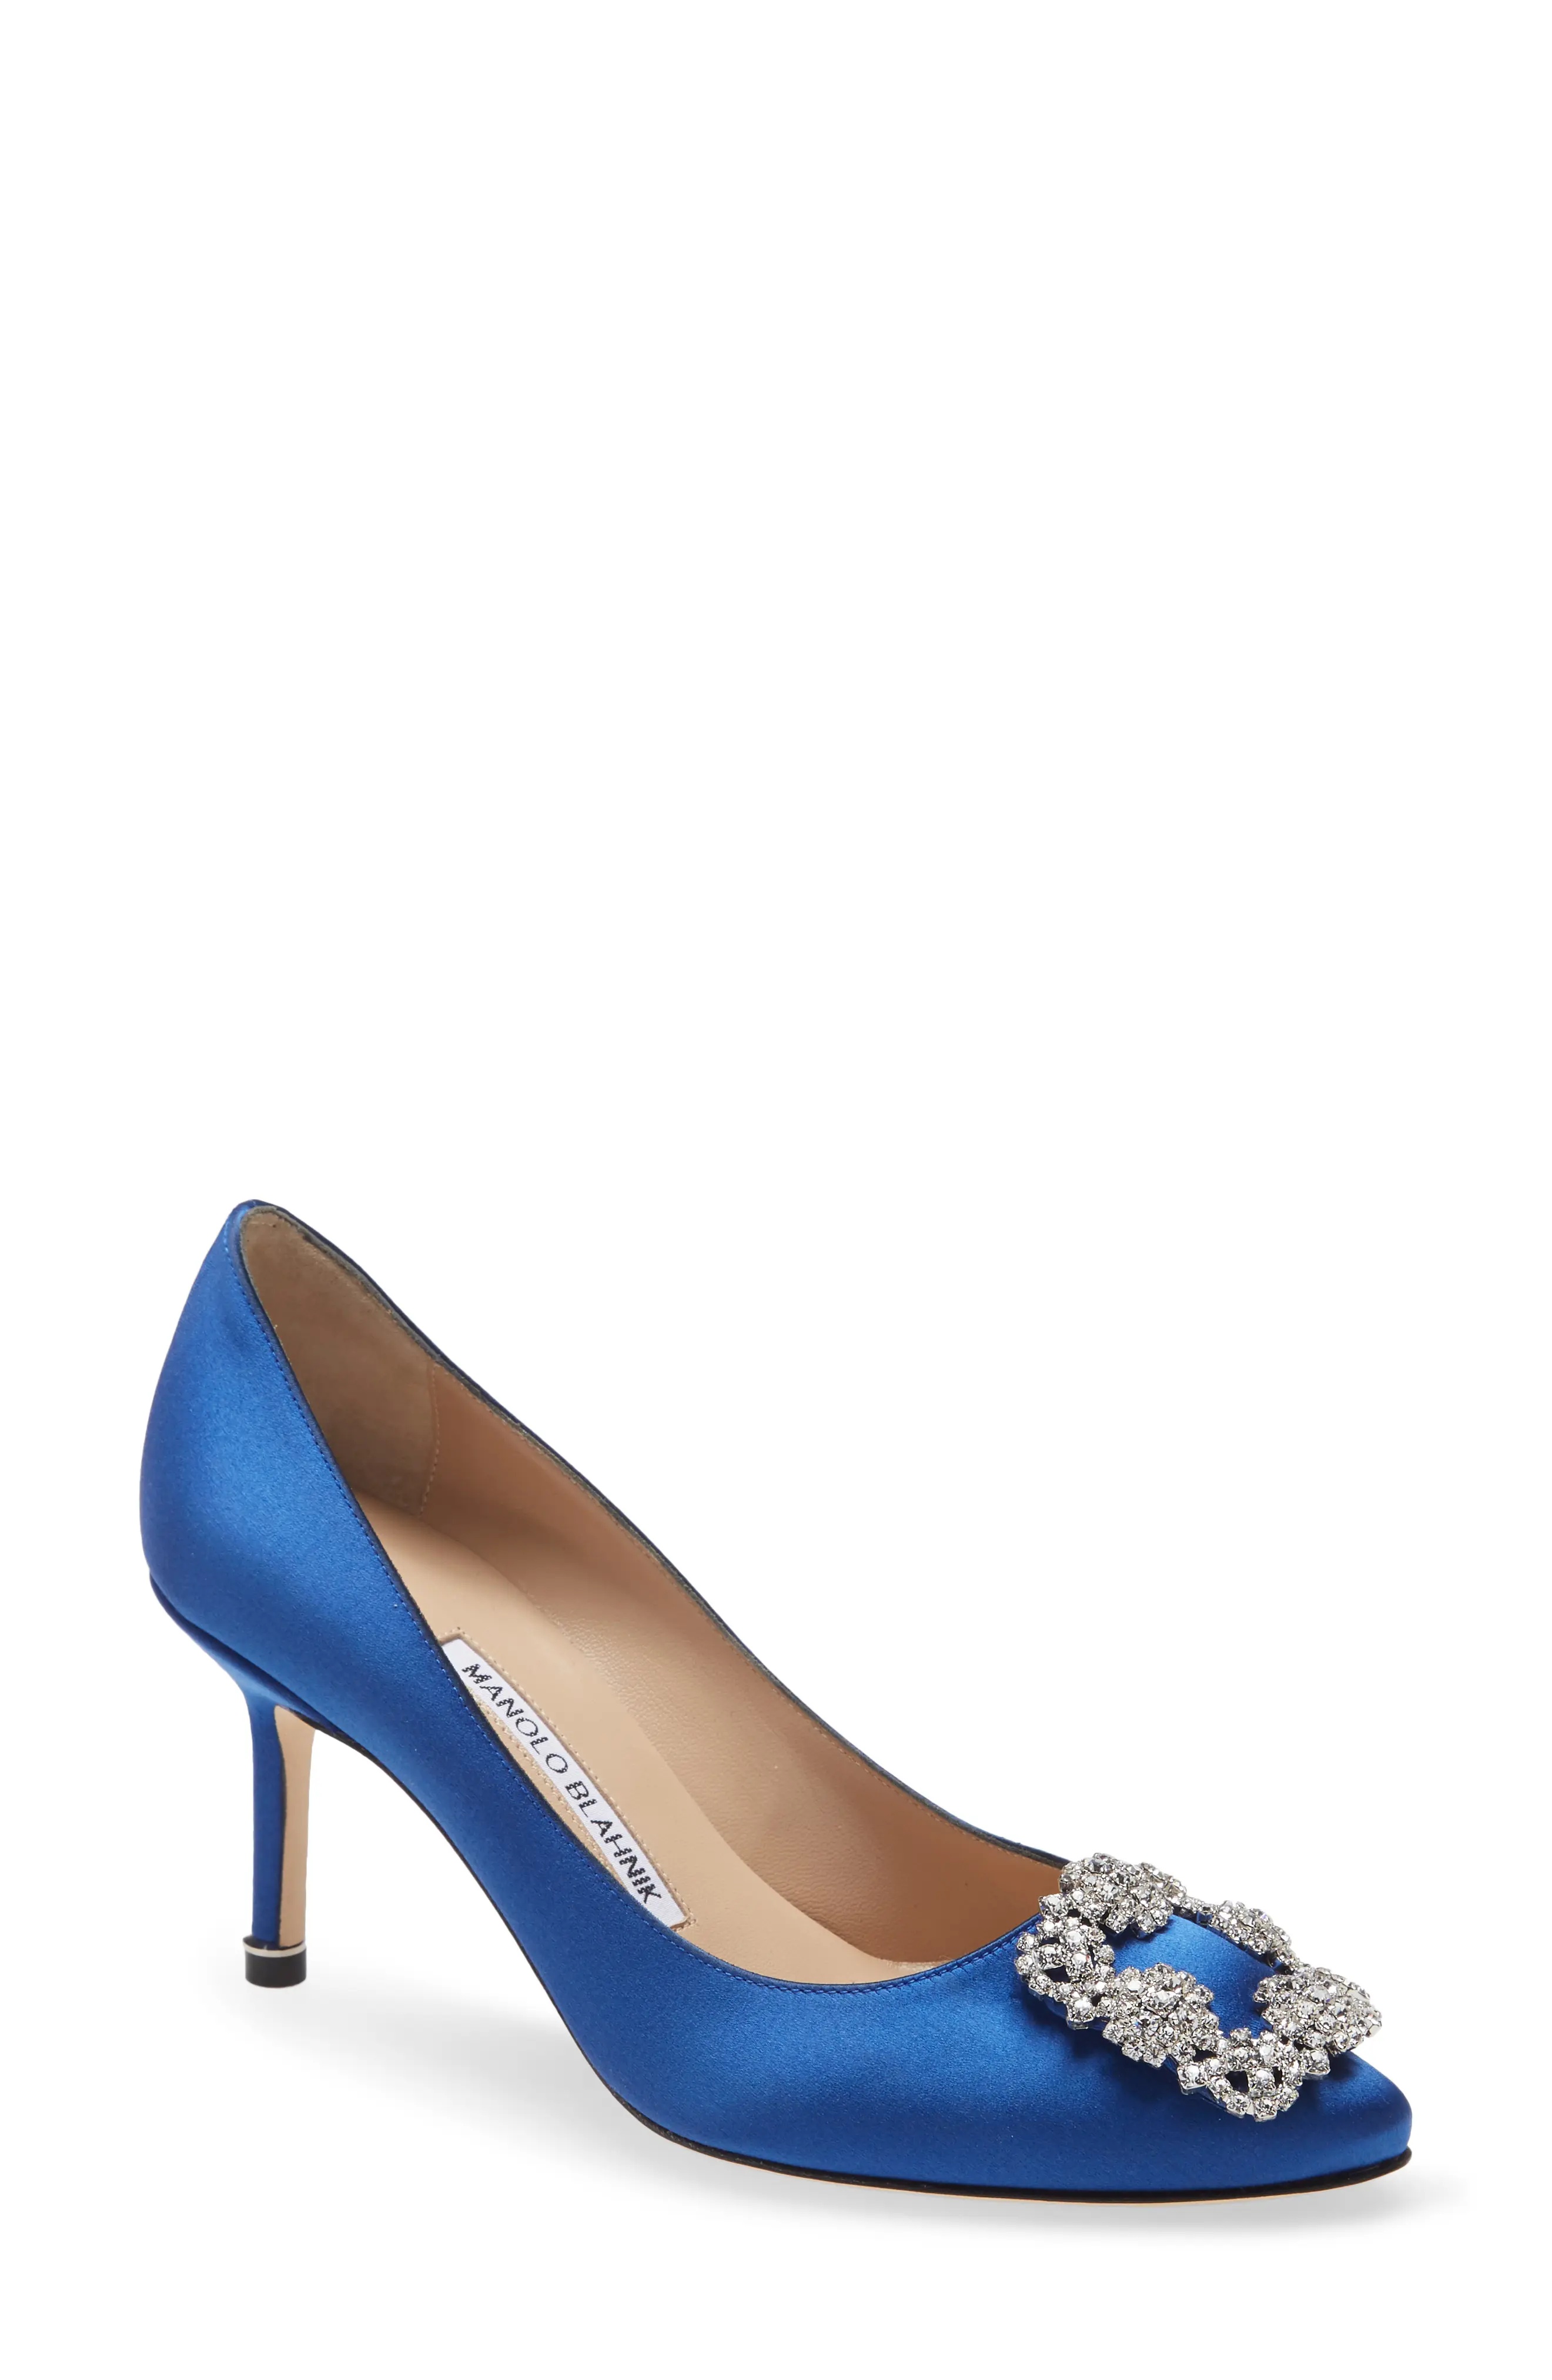 Hangisi Crystal Buckle Pump in Blue Satin Clear/Buckle - 1